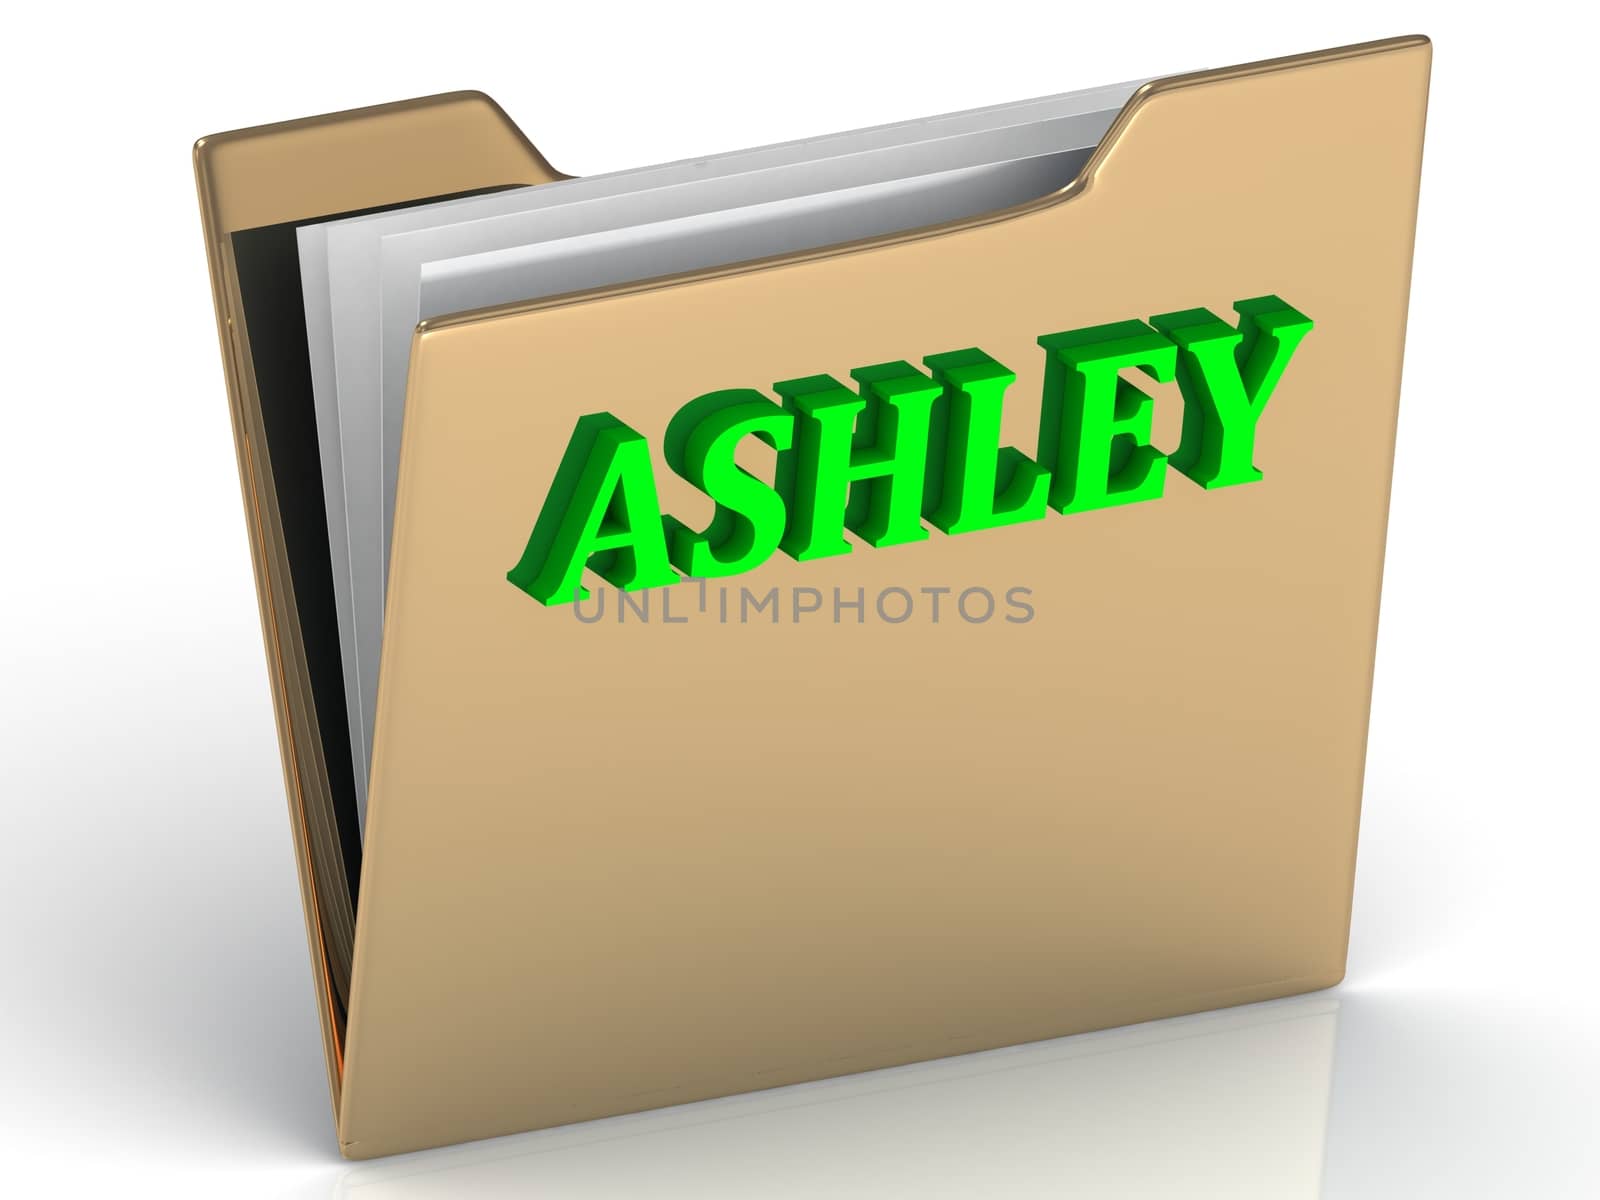 ASHLEY- bright green letters on gold paperwork folder by GreenMost